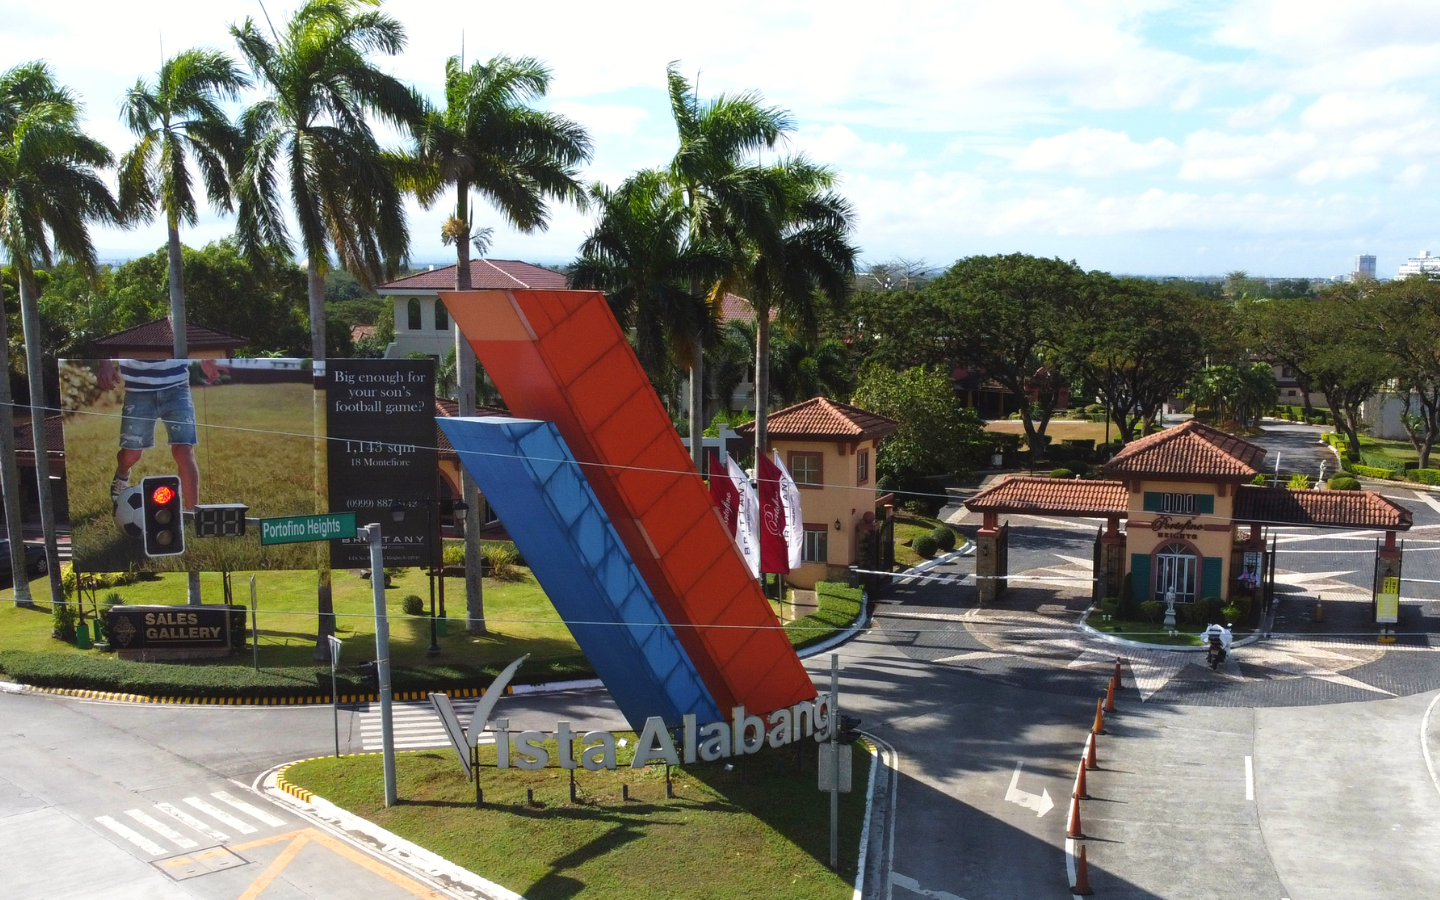 Image of Vista Alabang logo in front of the Portofino Heights entrance